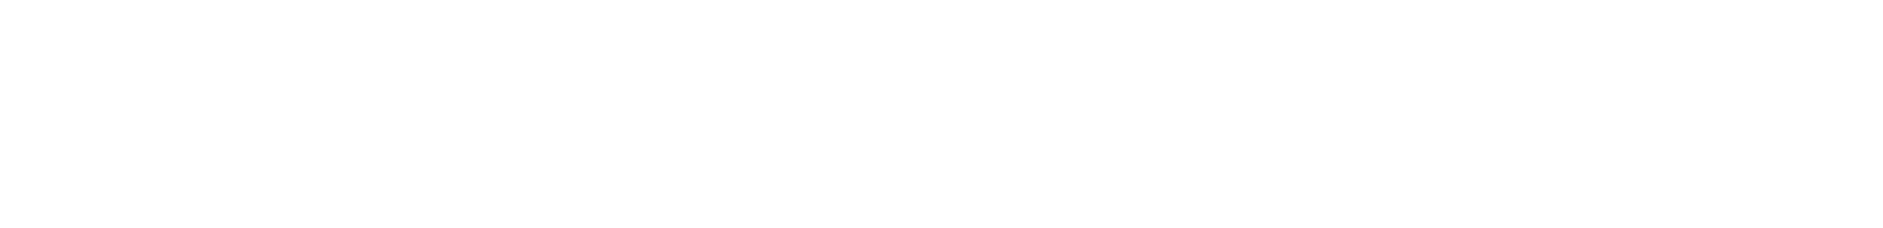 Marchio PayPal